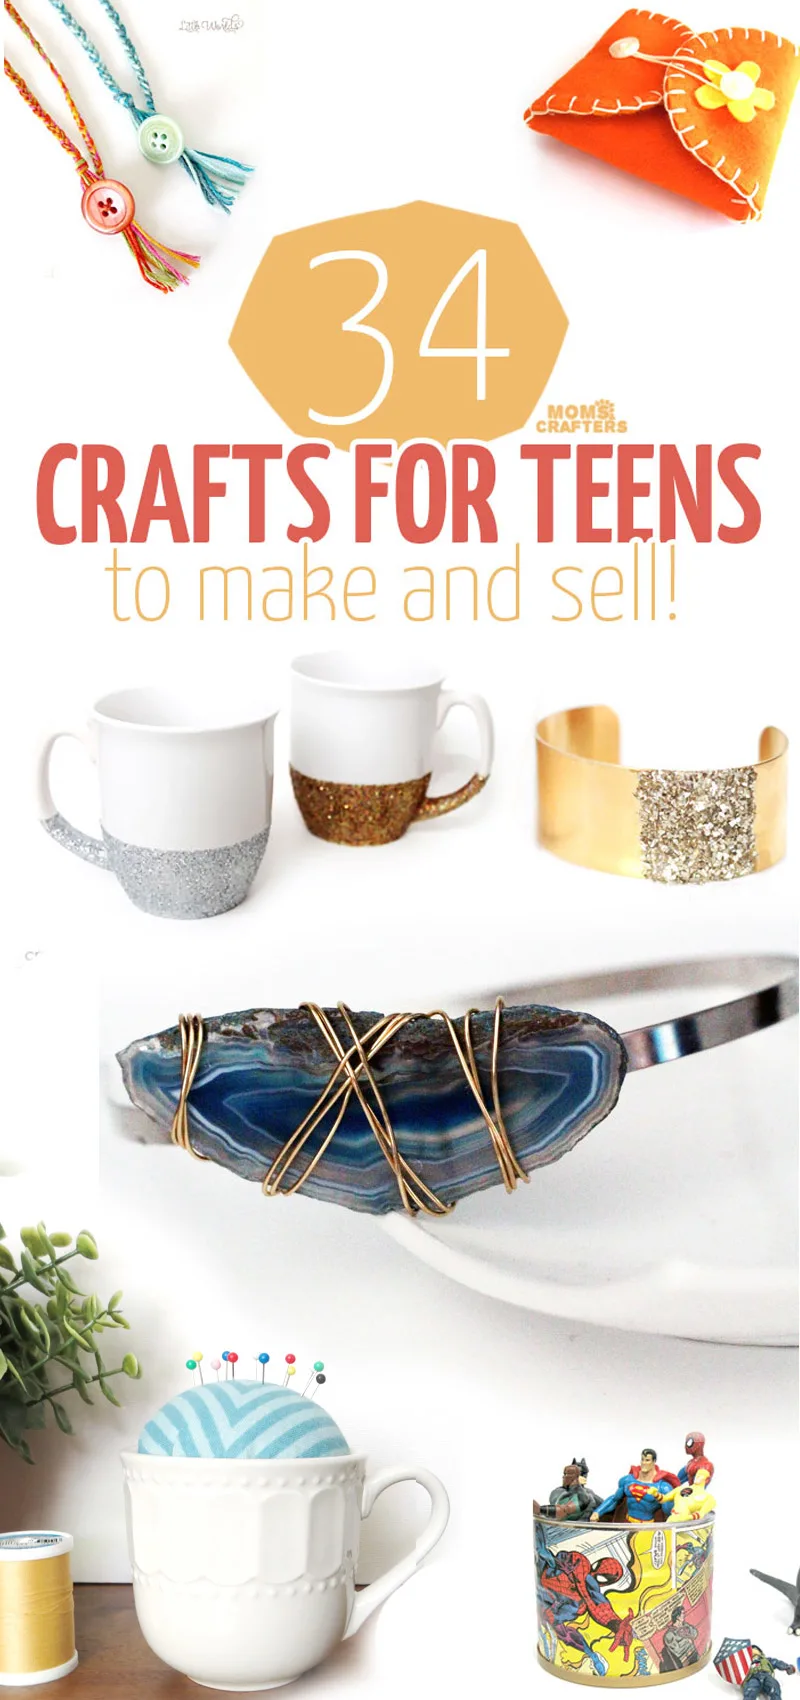 34 fun, functional crafts for teens to make and sell! What a great activity for teens and tweens - marketing handmade items and selling on Etsy! Here is a great list of DIY projects and ideas to start with. #teencrafts #diy #crafts